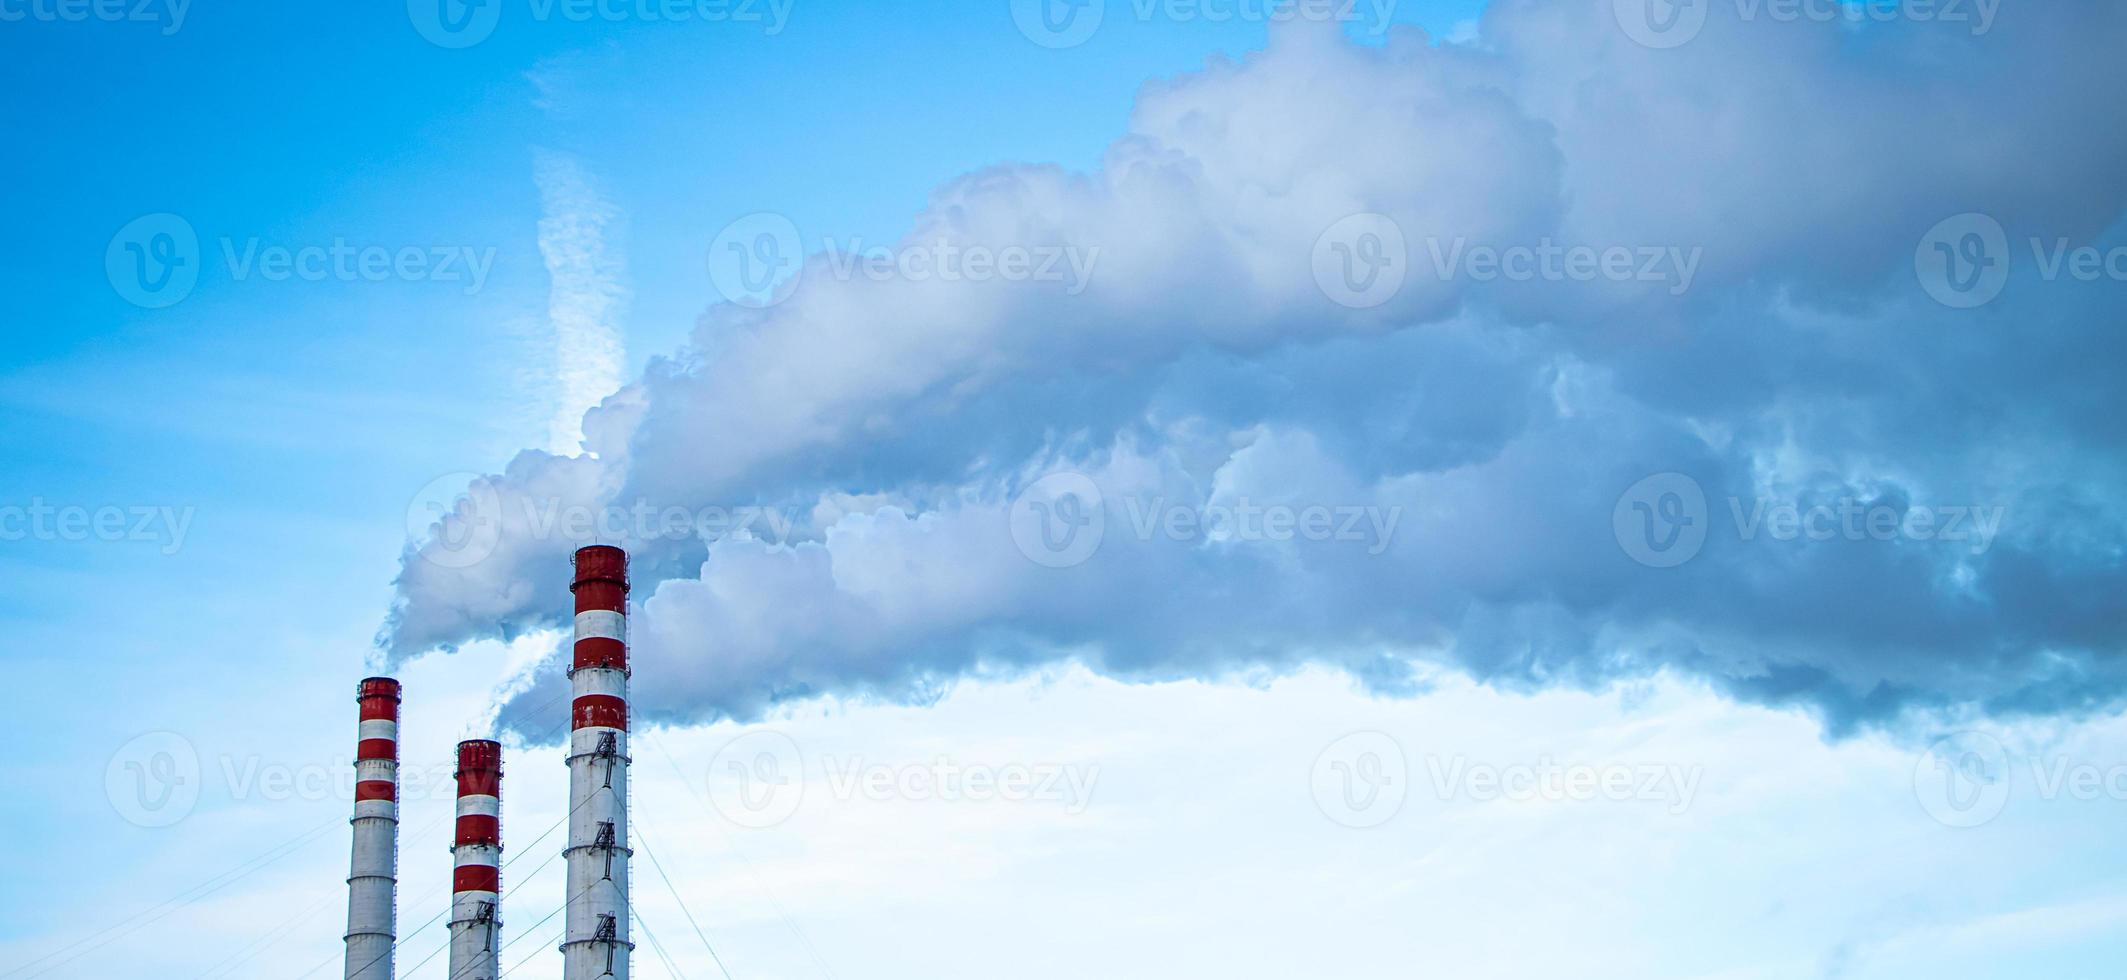 Air pollution. Smoking chimneys against blue sky. photo